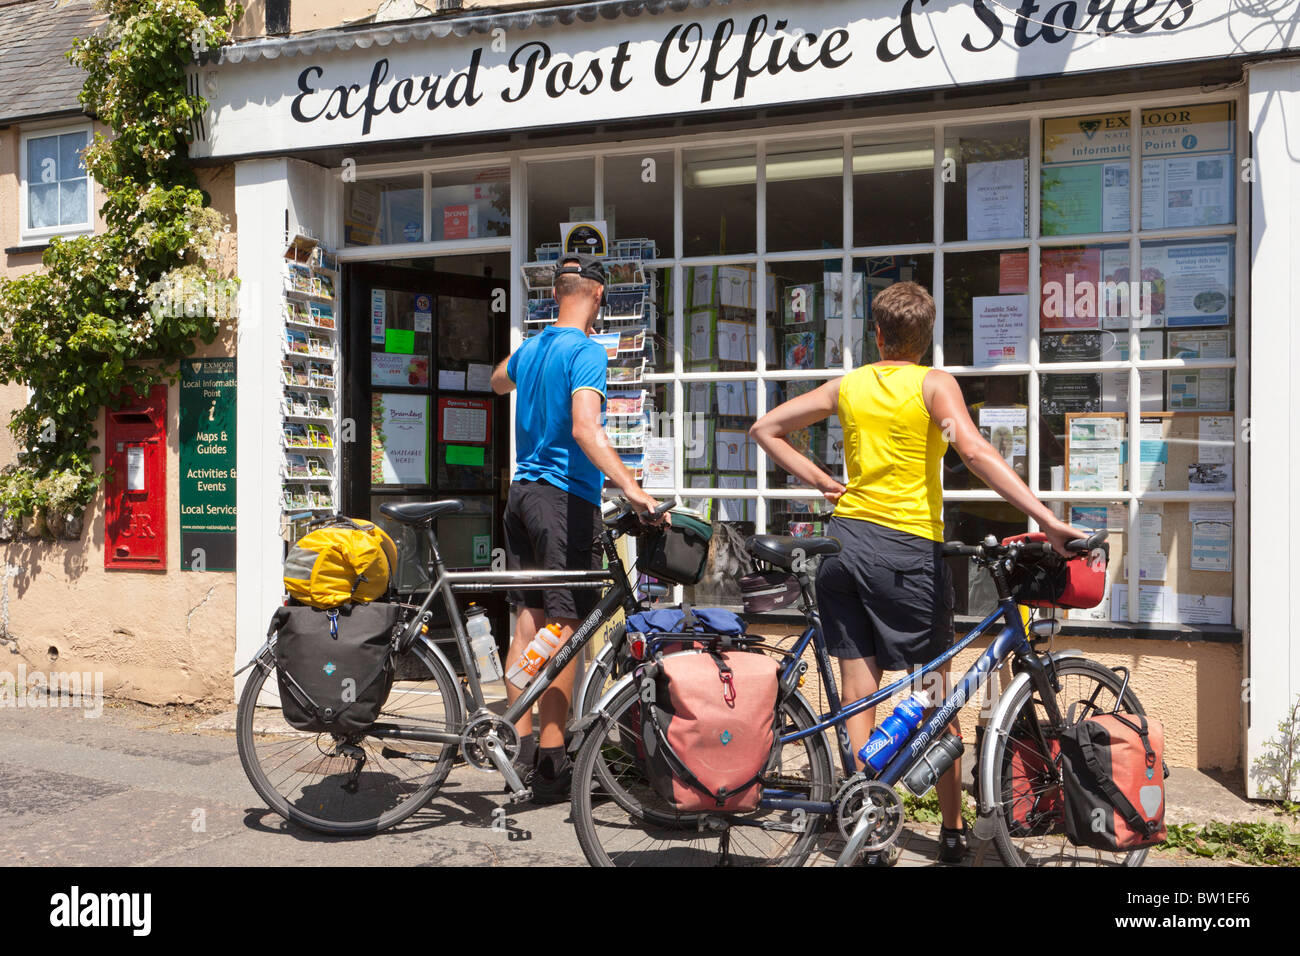 A couple of touring cyclists looking at postcards in the Exford Post Office & Stores in the Exmoor village of Exford, Somerset UK Stock Photo